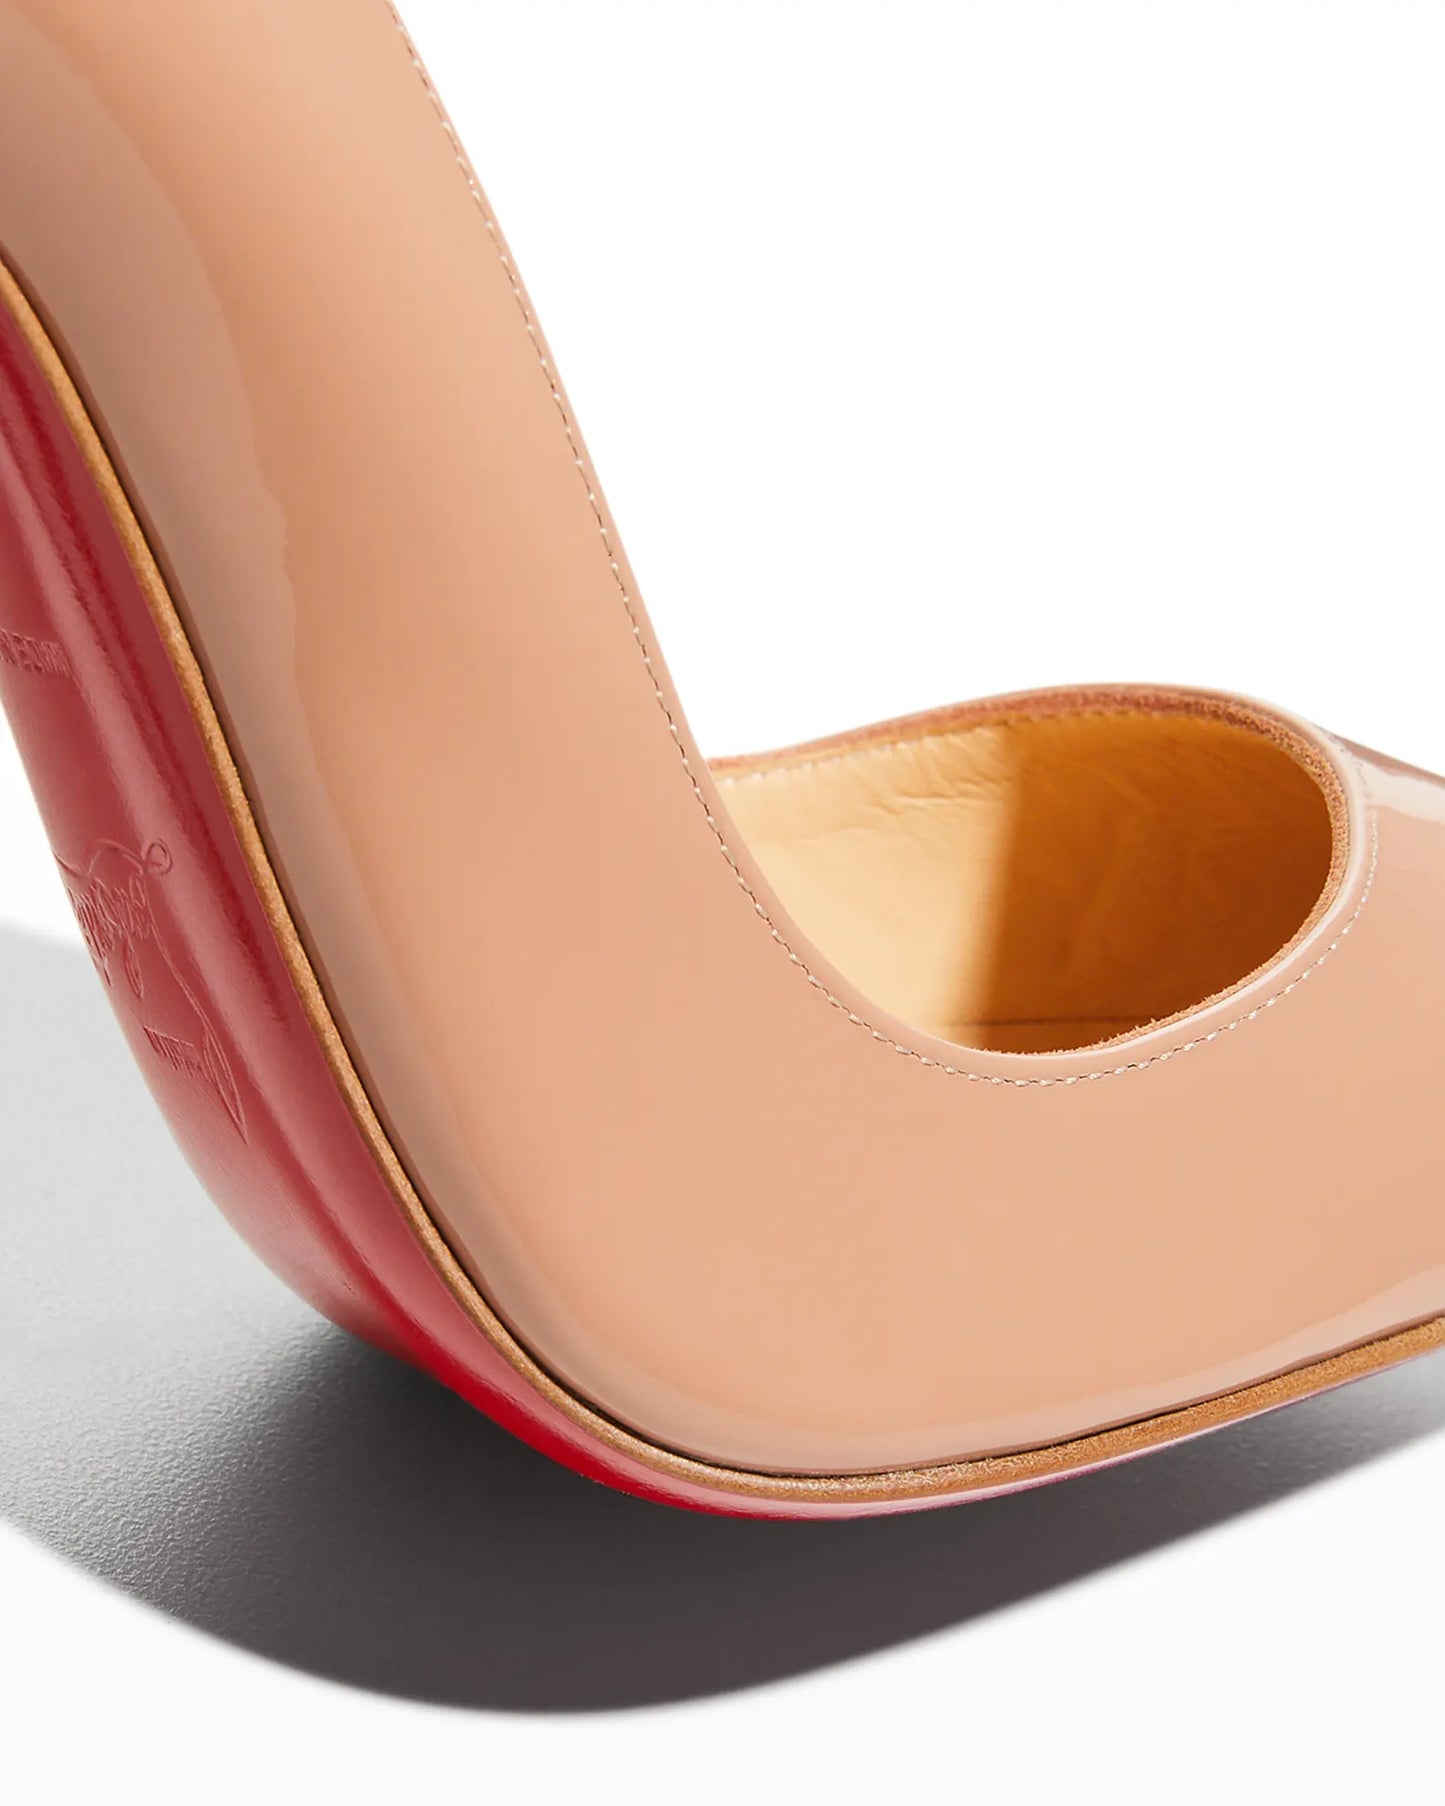 CHRISTIAN LOUBOUTIN NUDE SO KATE PATENT POINTED-TOE PUMP